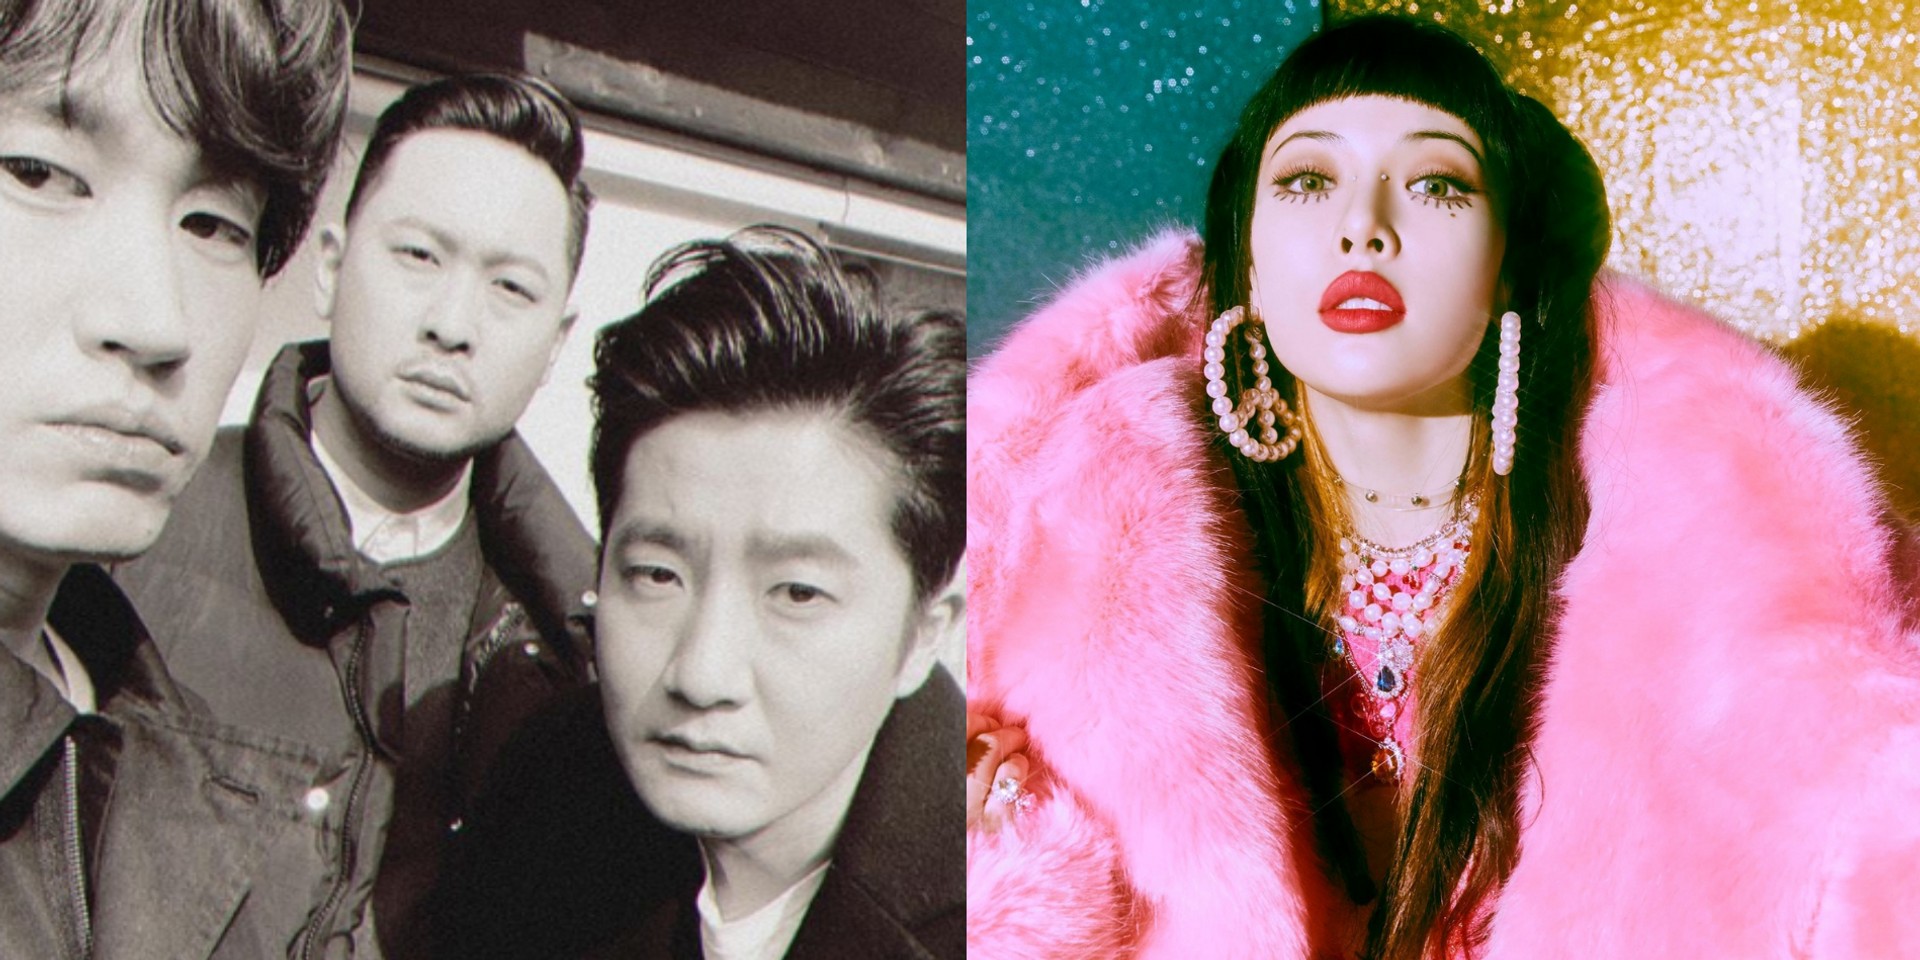 Songs and albums by Epik High, HyunA, IU, and more return to Spotify